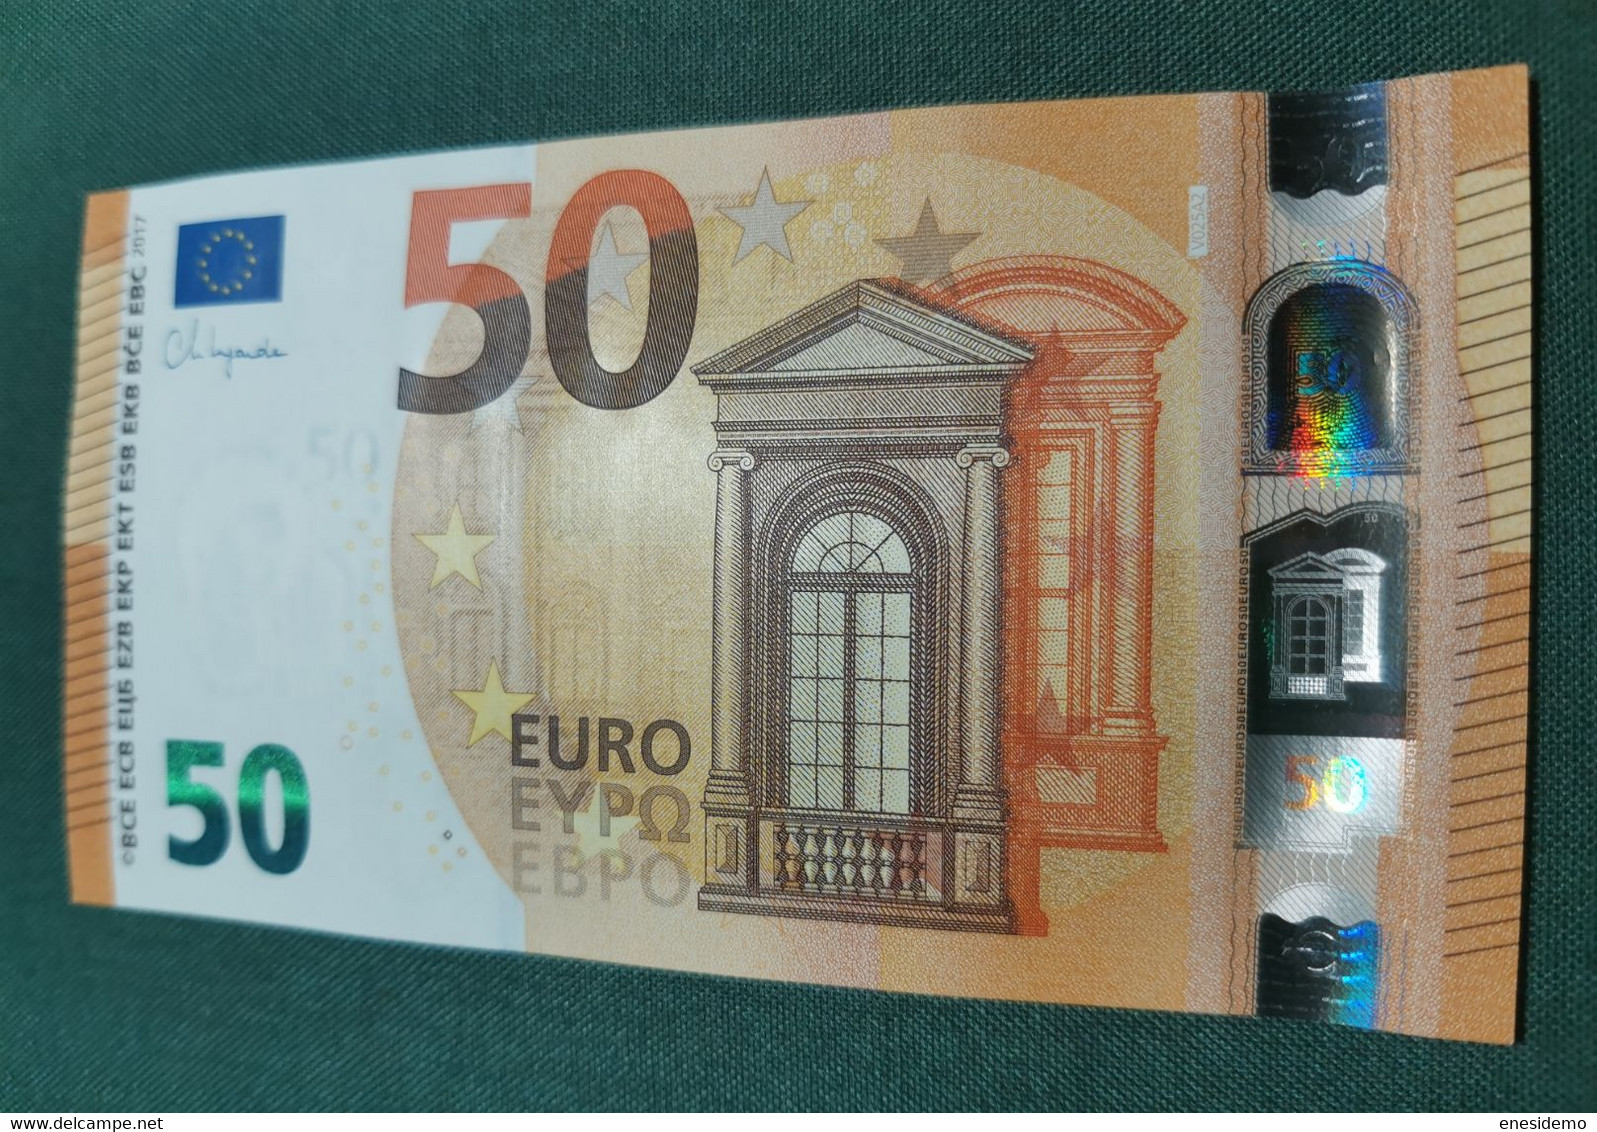 50 EURO SPAIN 2017 LAGARDE V025A2 VC SC FDS UNCIRCULATED PERFECT - 50 Euro